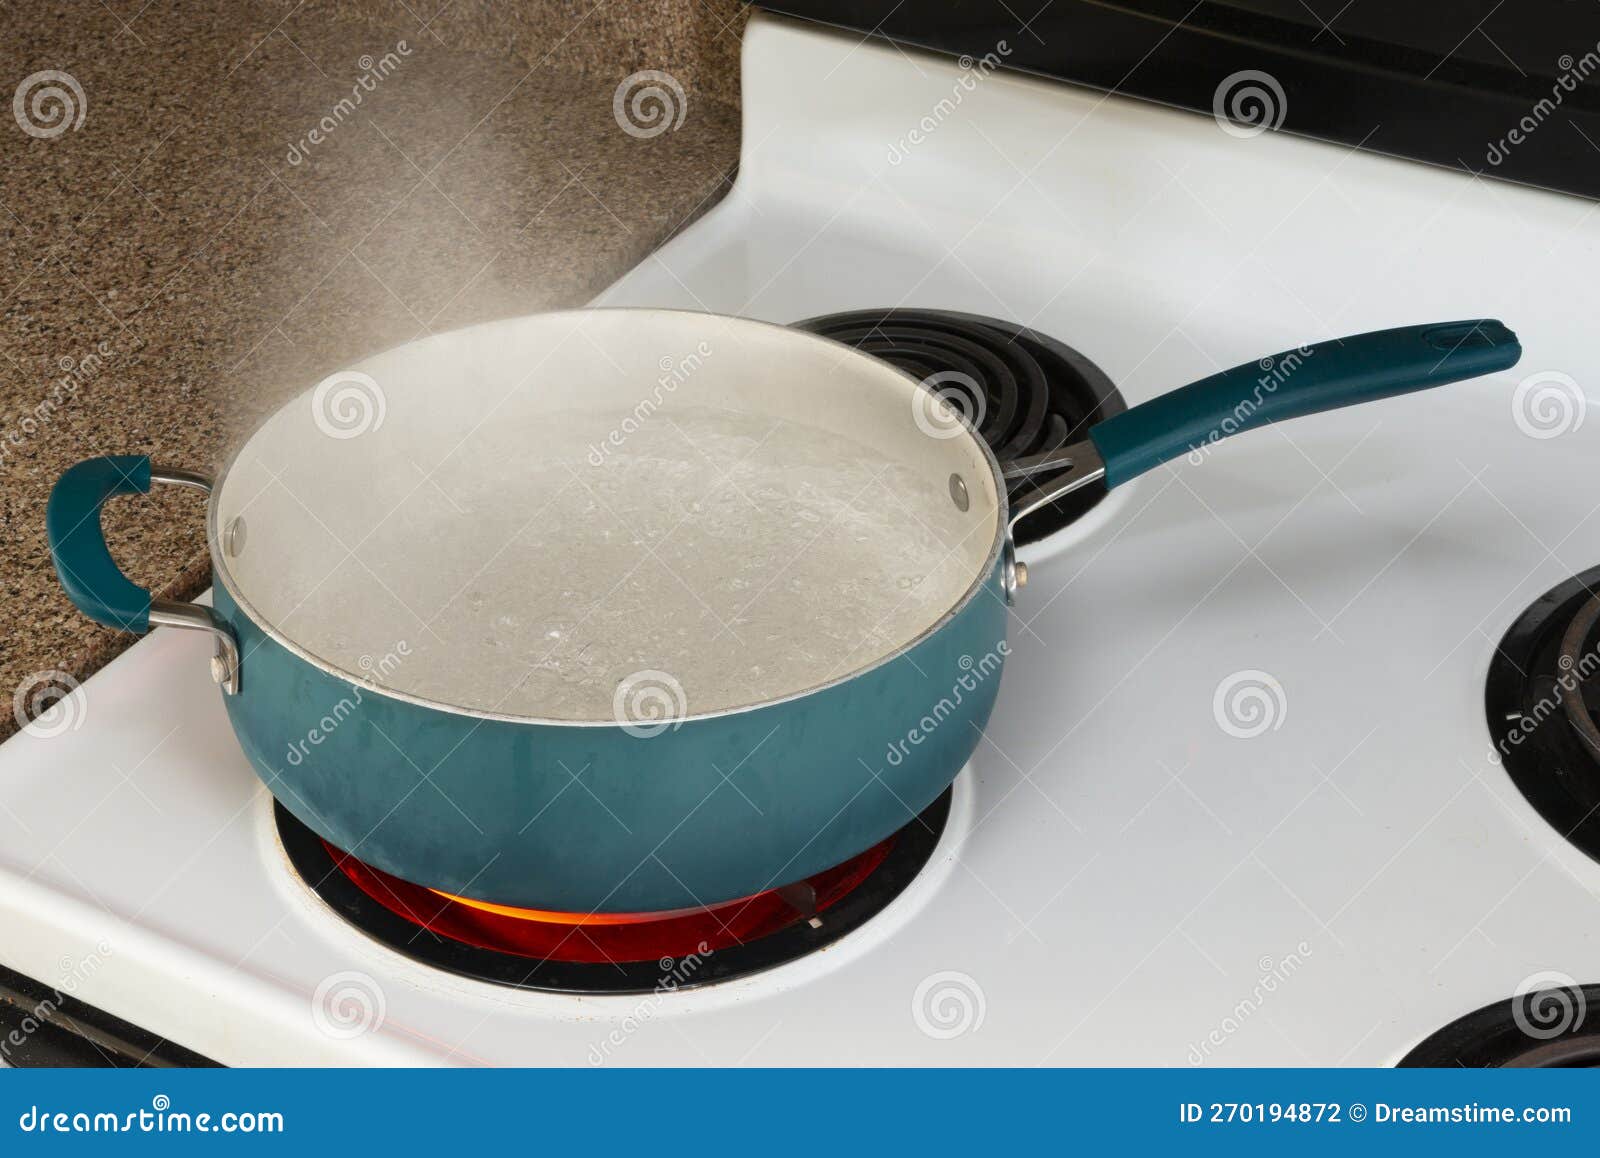 Boiling Pot Of Water On Hot Electric Burner Stock Photo, Picture and  Royalty Free Image. Image 34317573.